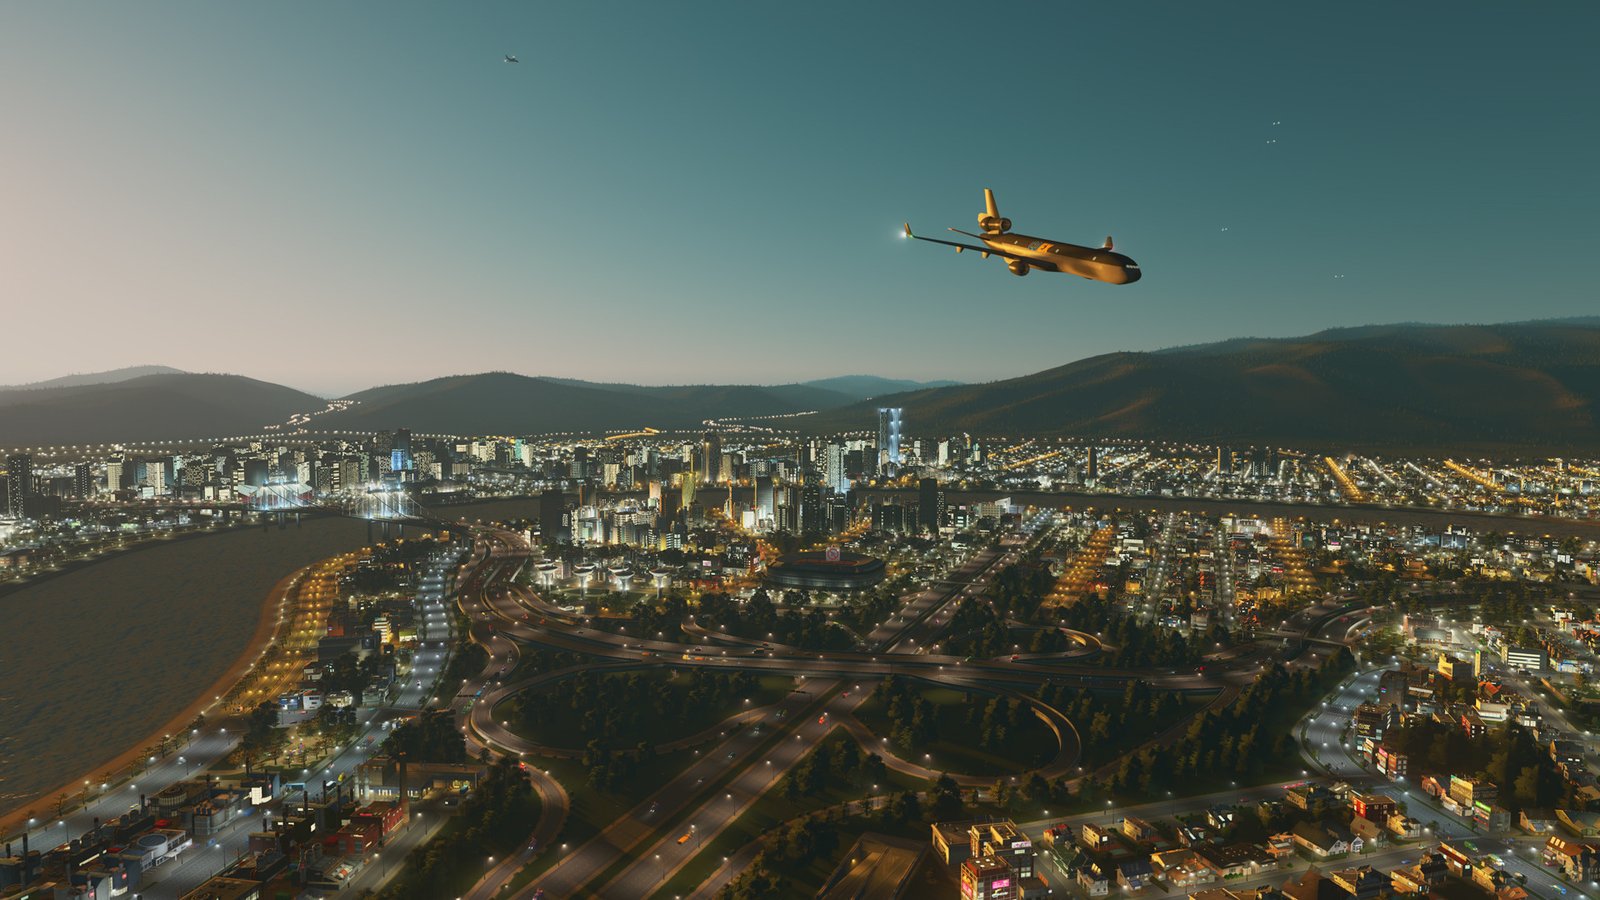 The new Cities: Skylines expansion is all about big modular airports